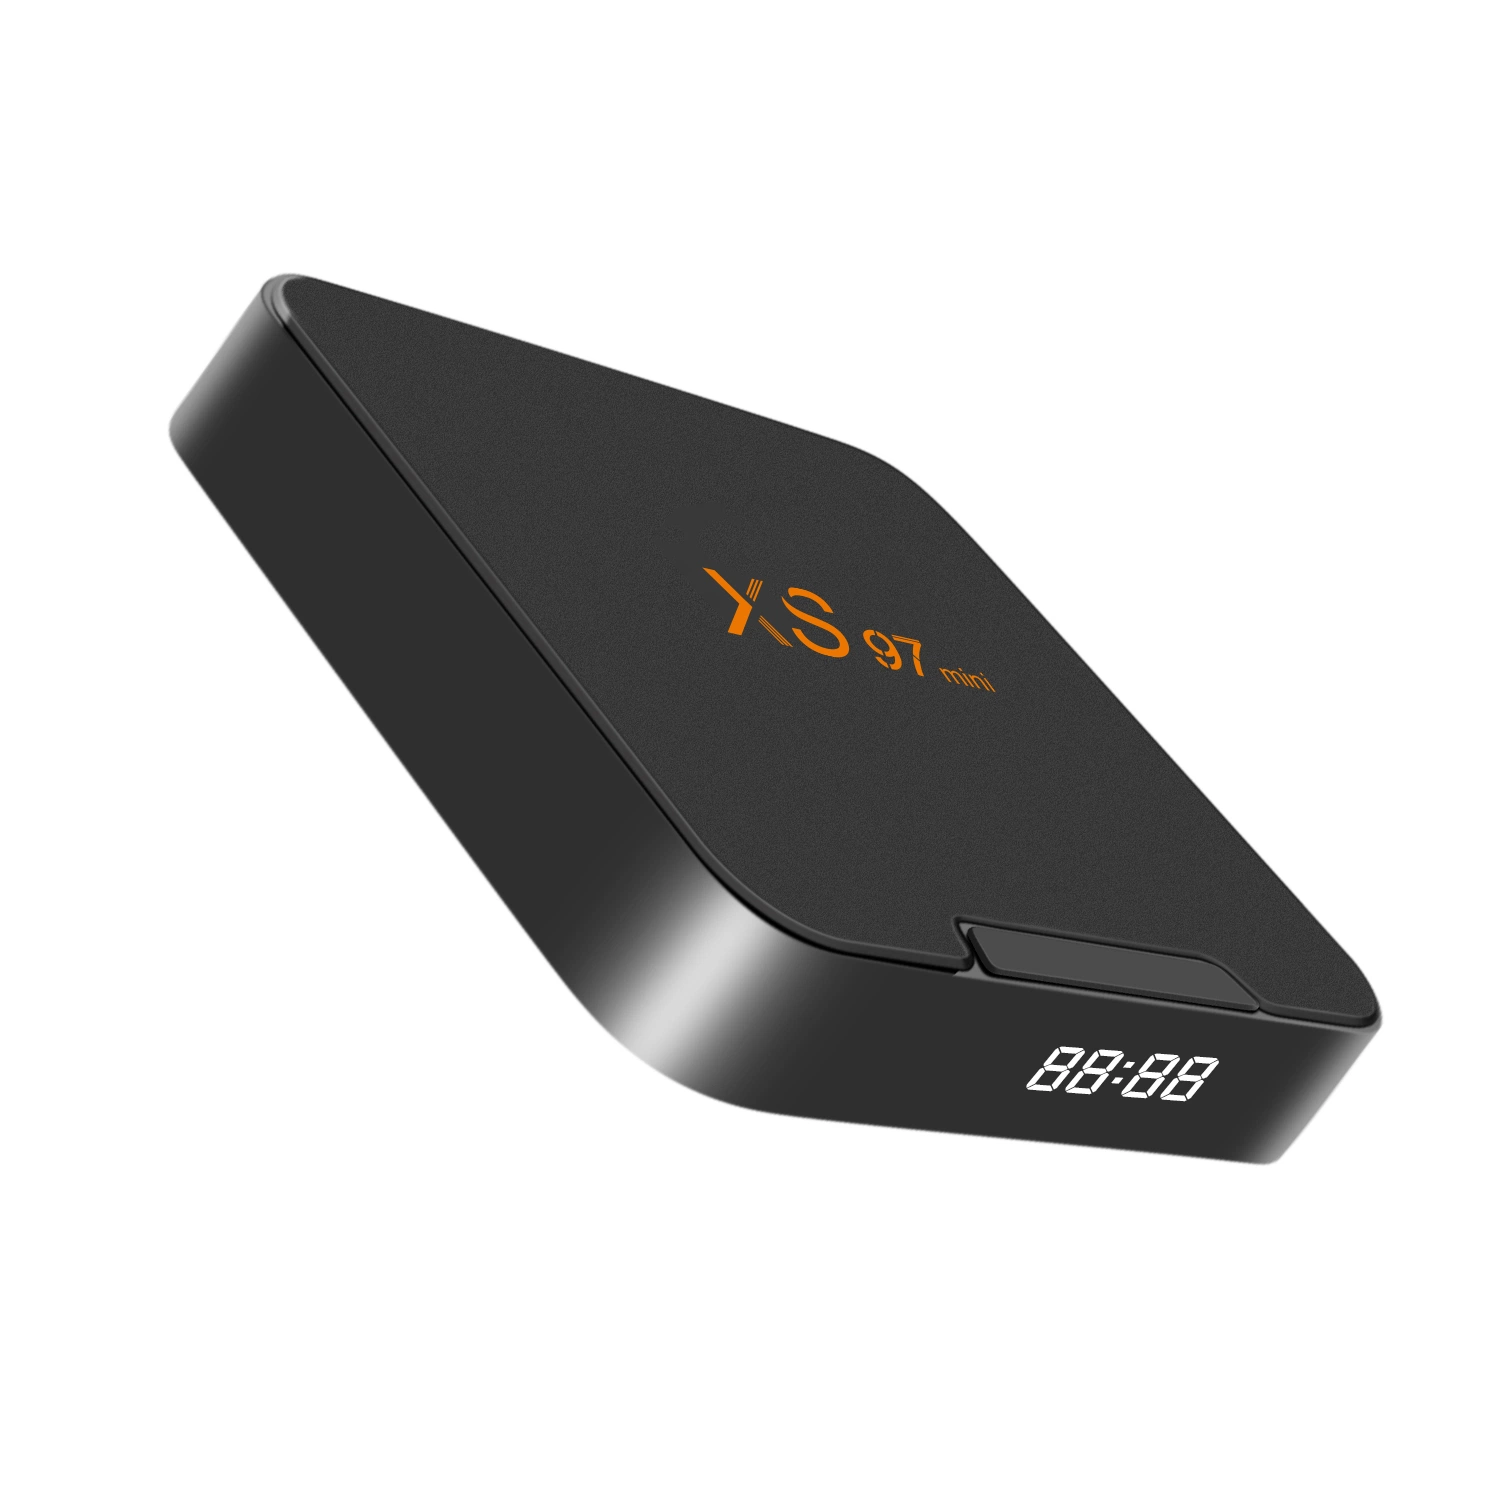 2g 16g Quad Core Dual WiFi Android TV Box